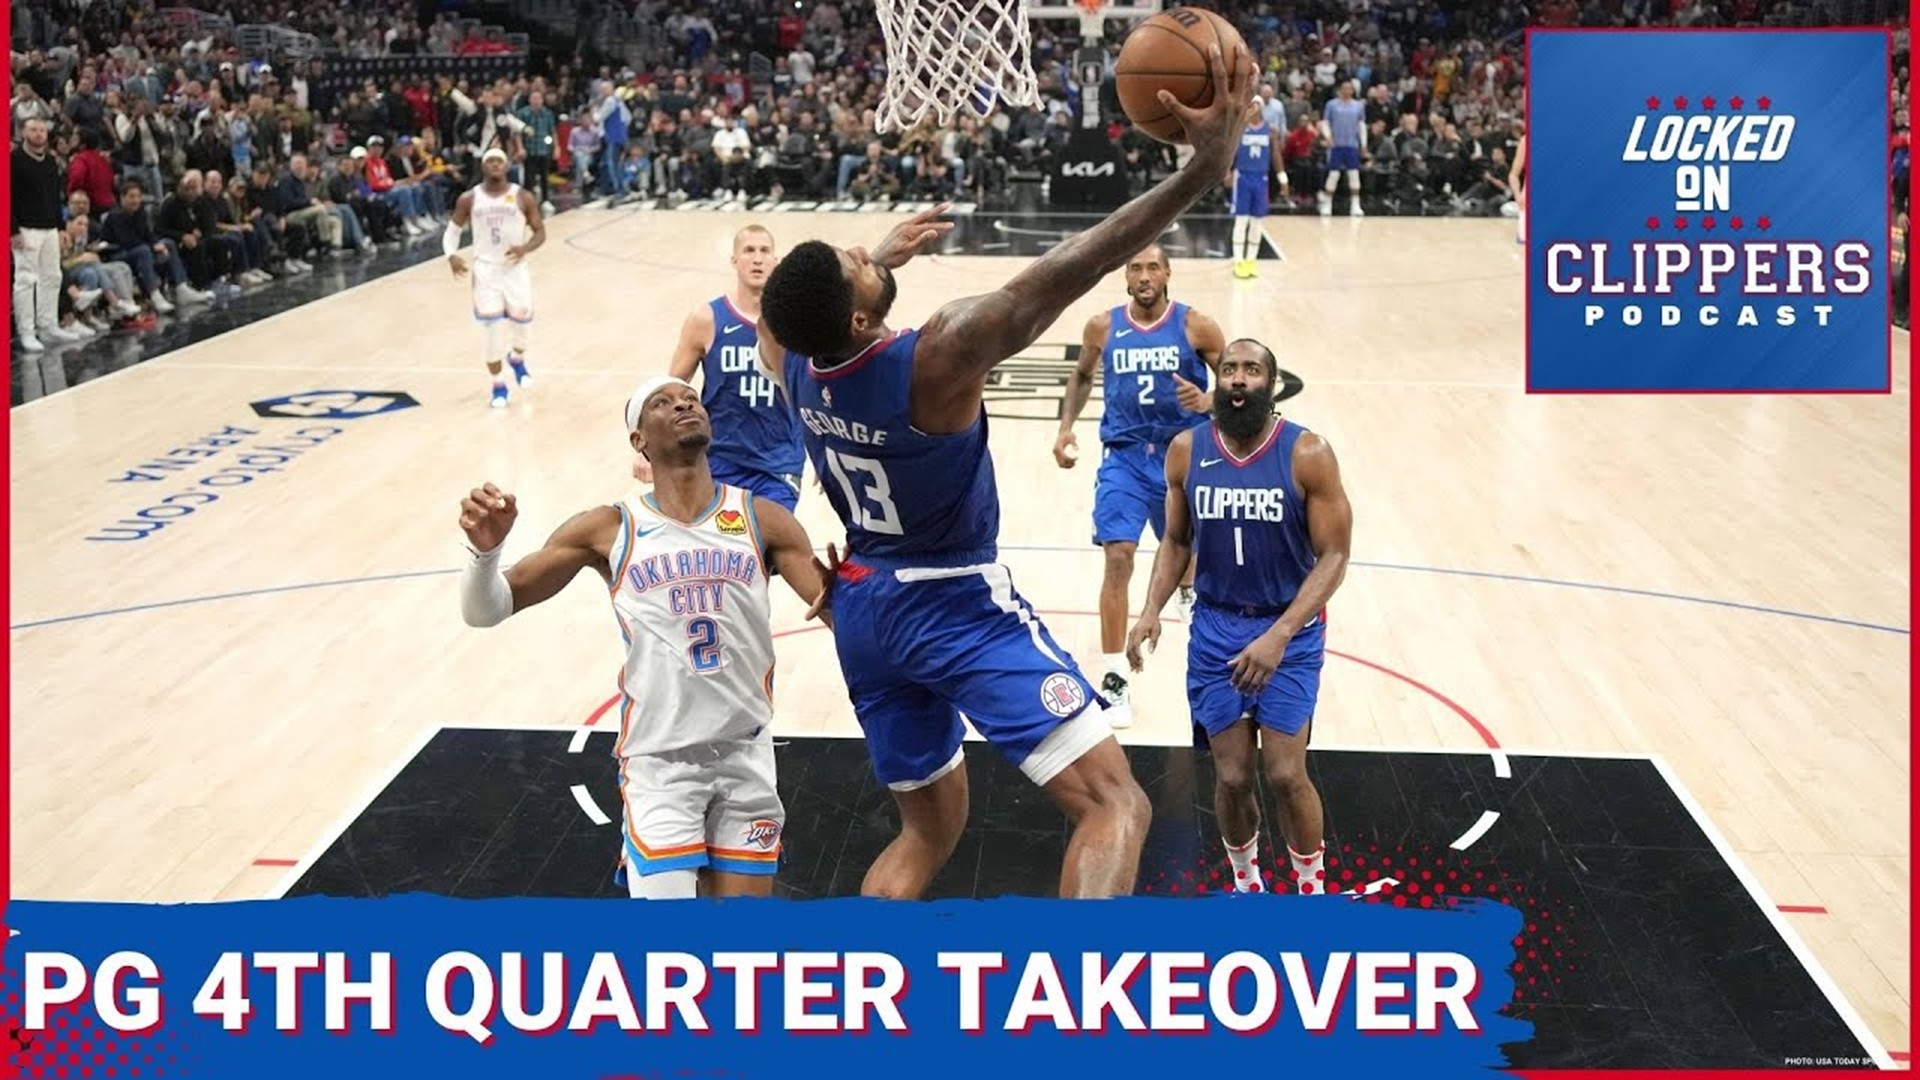 The LA Clippers bounced back against the Oklahoma City Thunder on Tuesday Night and were led by Paul George, who took over the game with an 18 point 4th quarter.